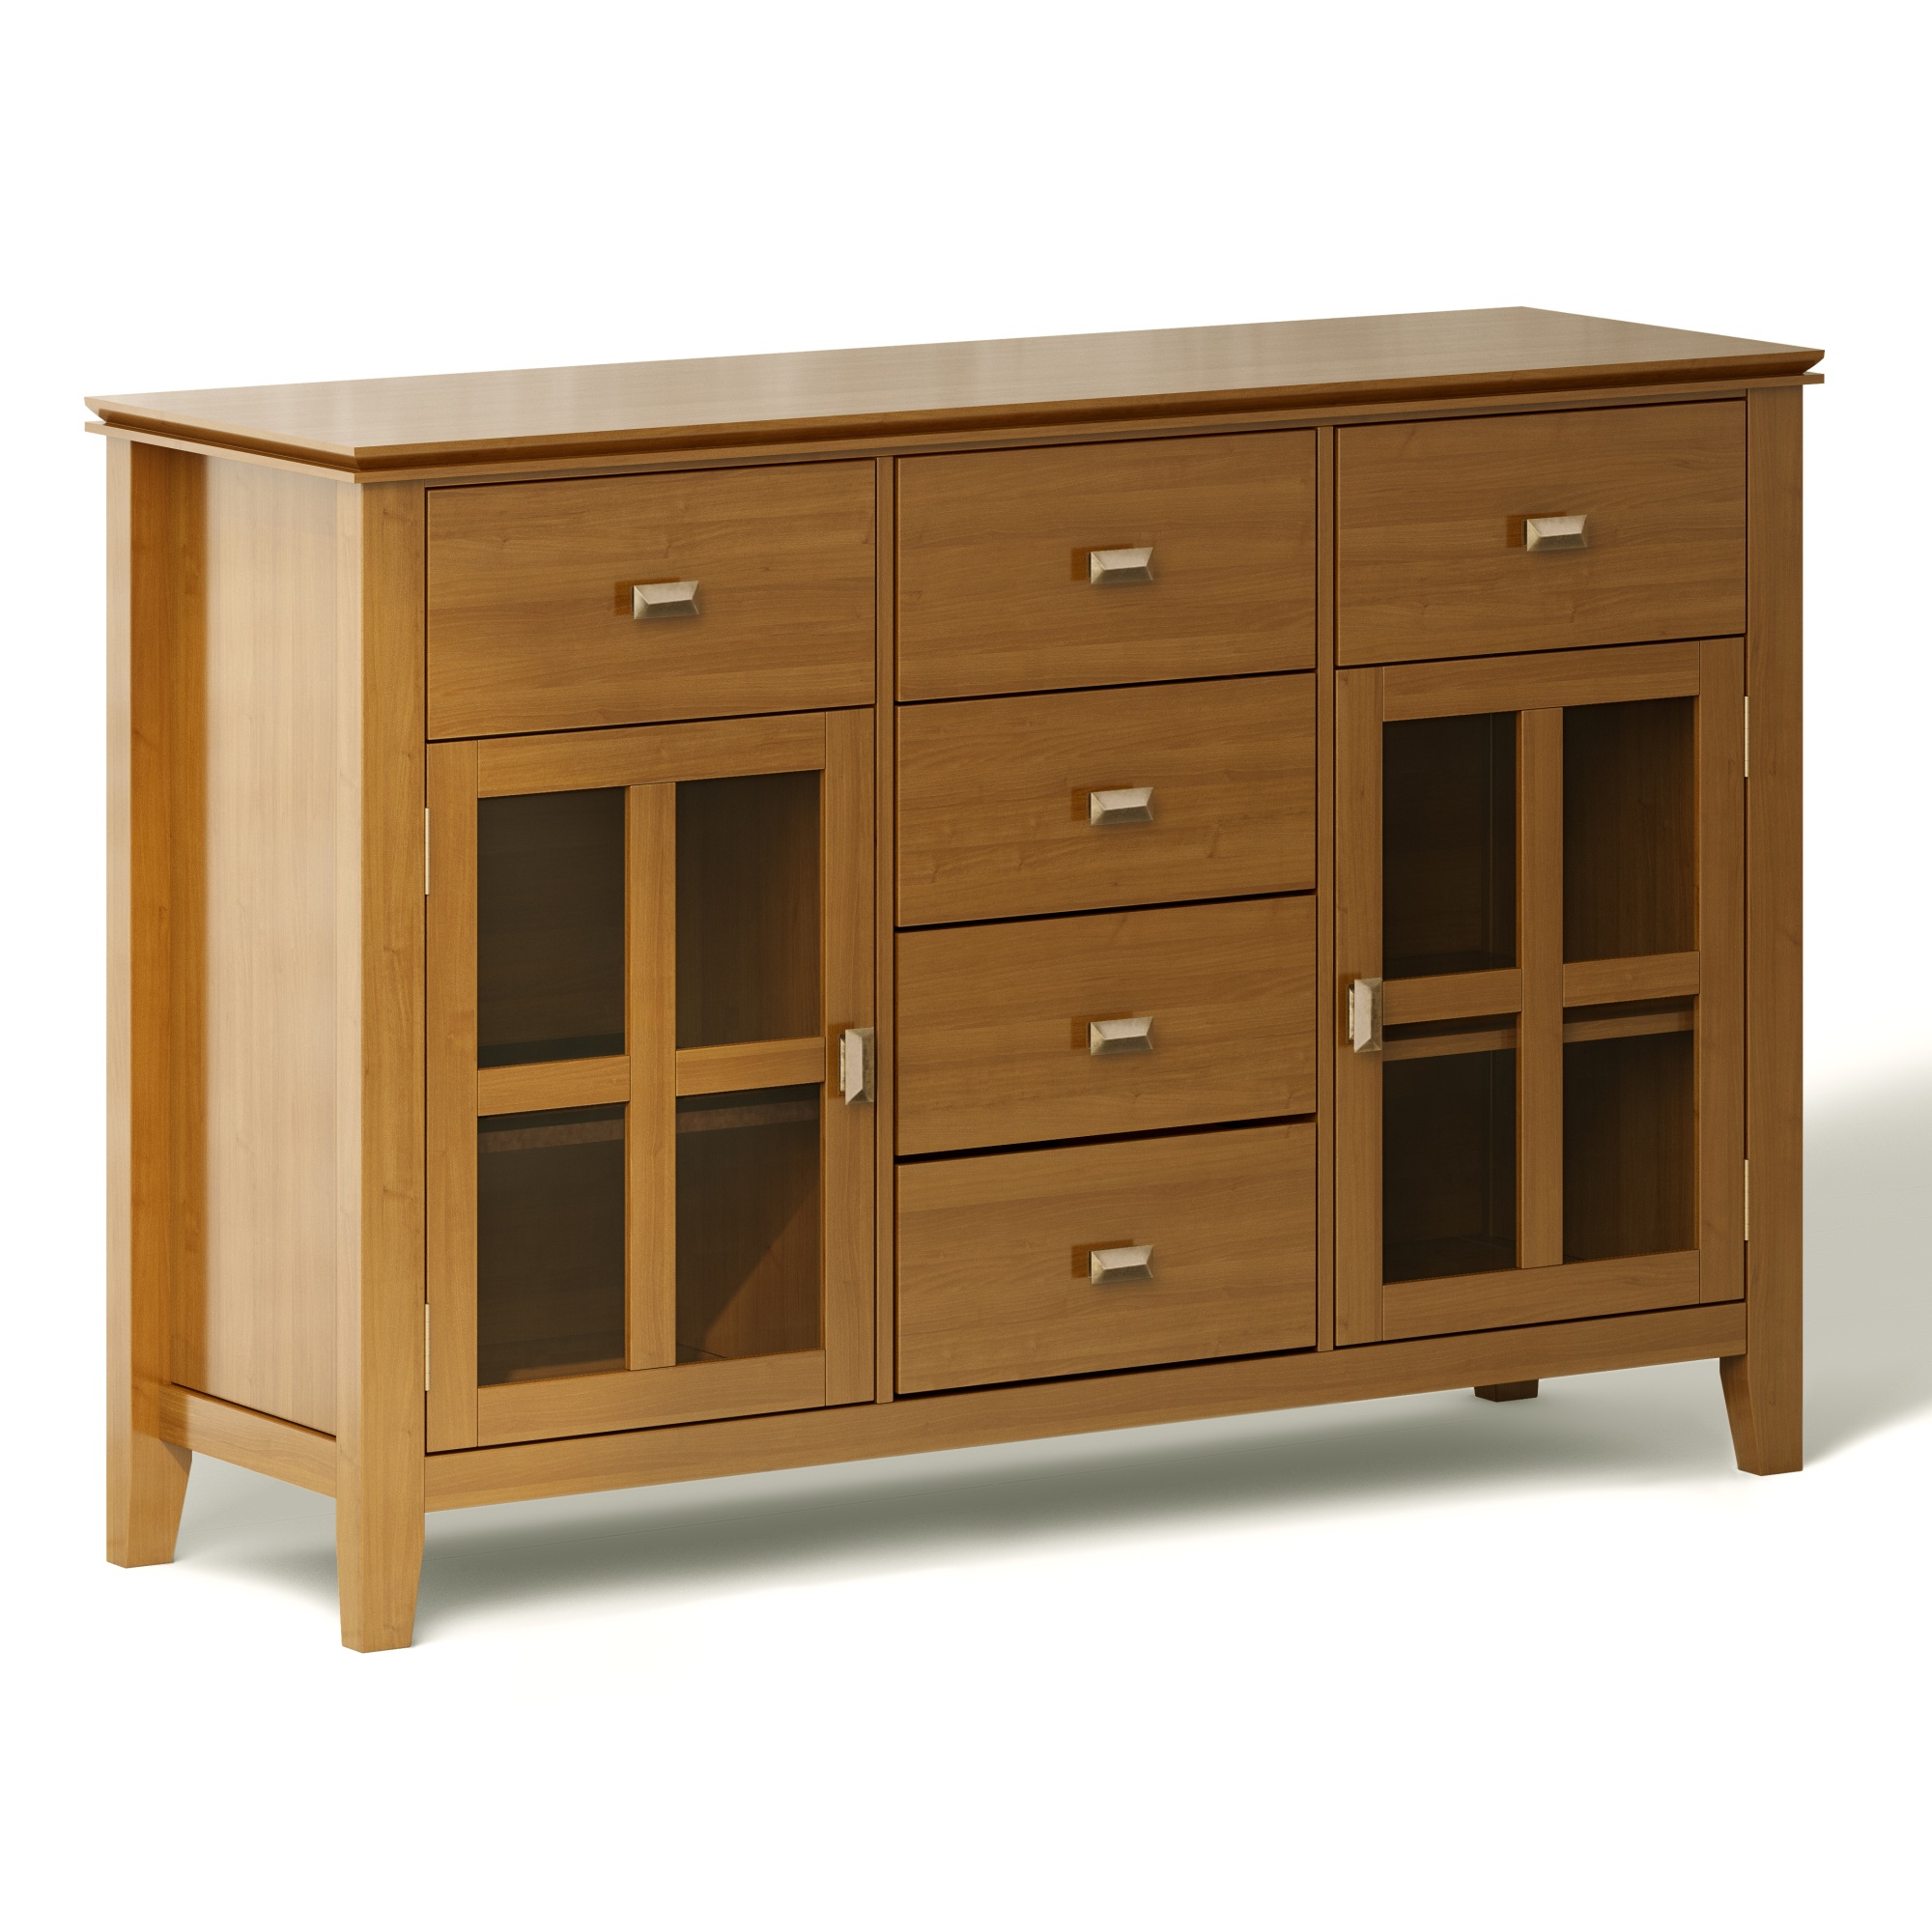 Simpli Home Artisan SOLID WOOD 54 inch Wide Transitional Sideboard Buffet Credenza in Honey Brown